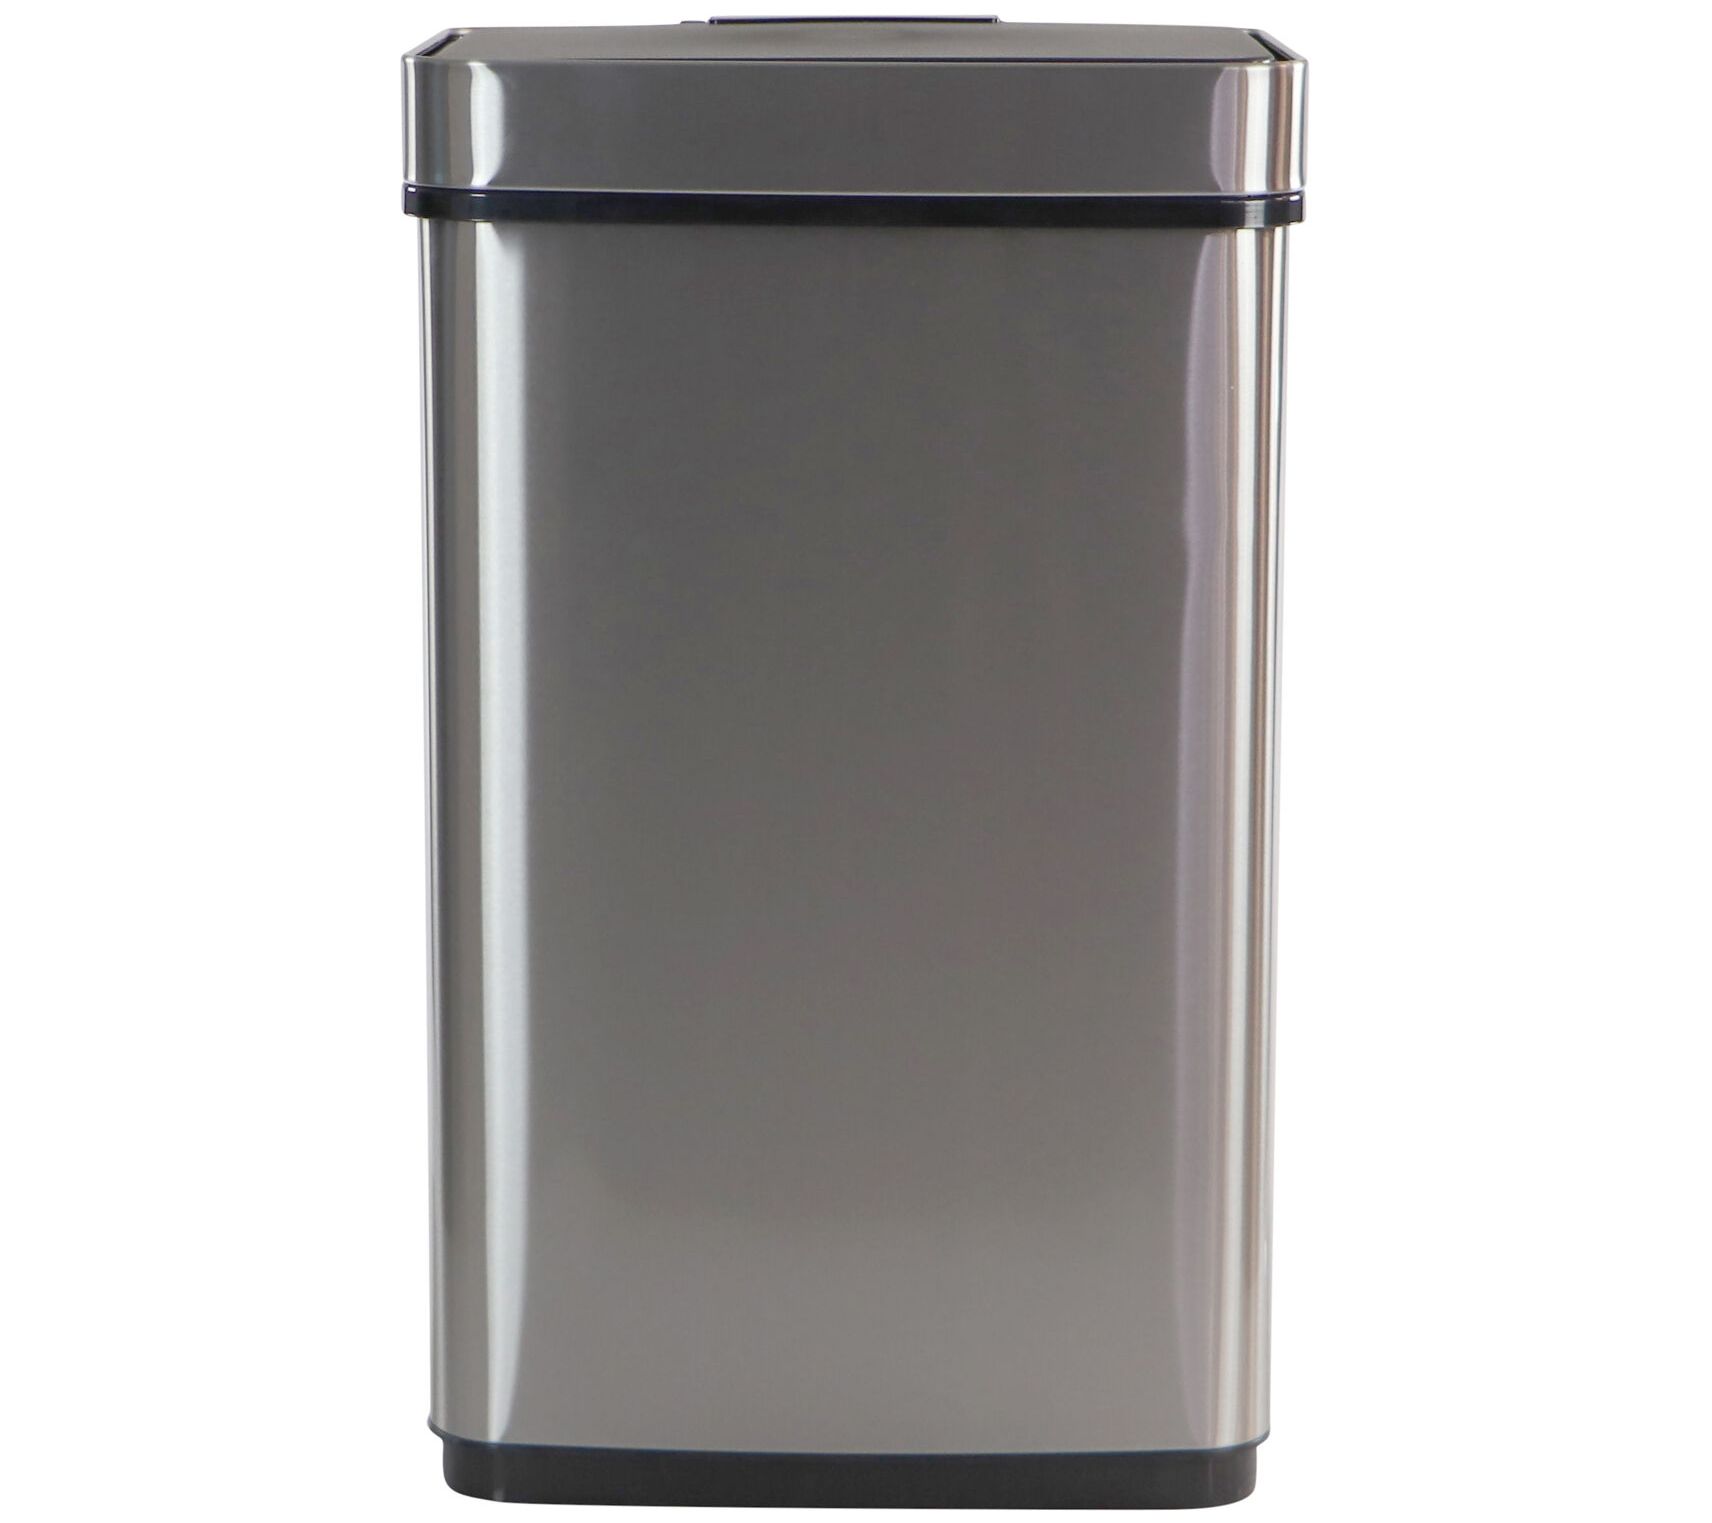 Honey-Can-Do Tall Slim 40-Liter Stainless Steel Step Trash Can ,Silver